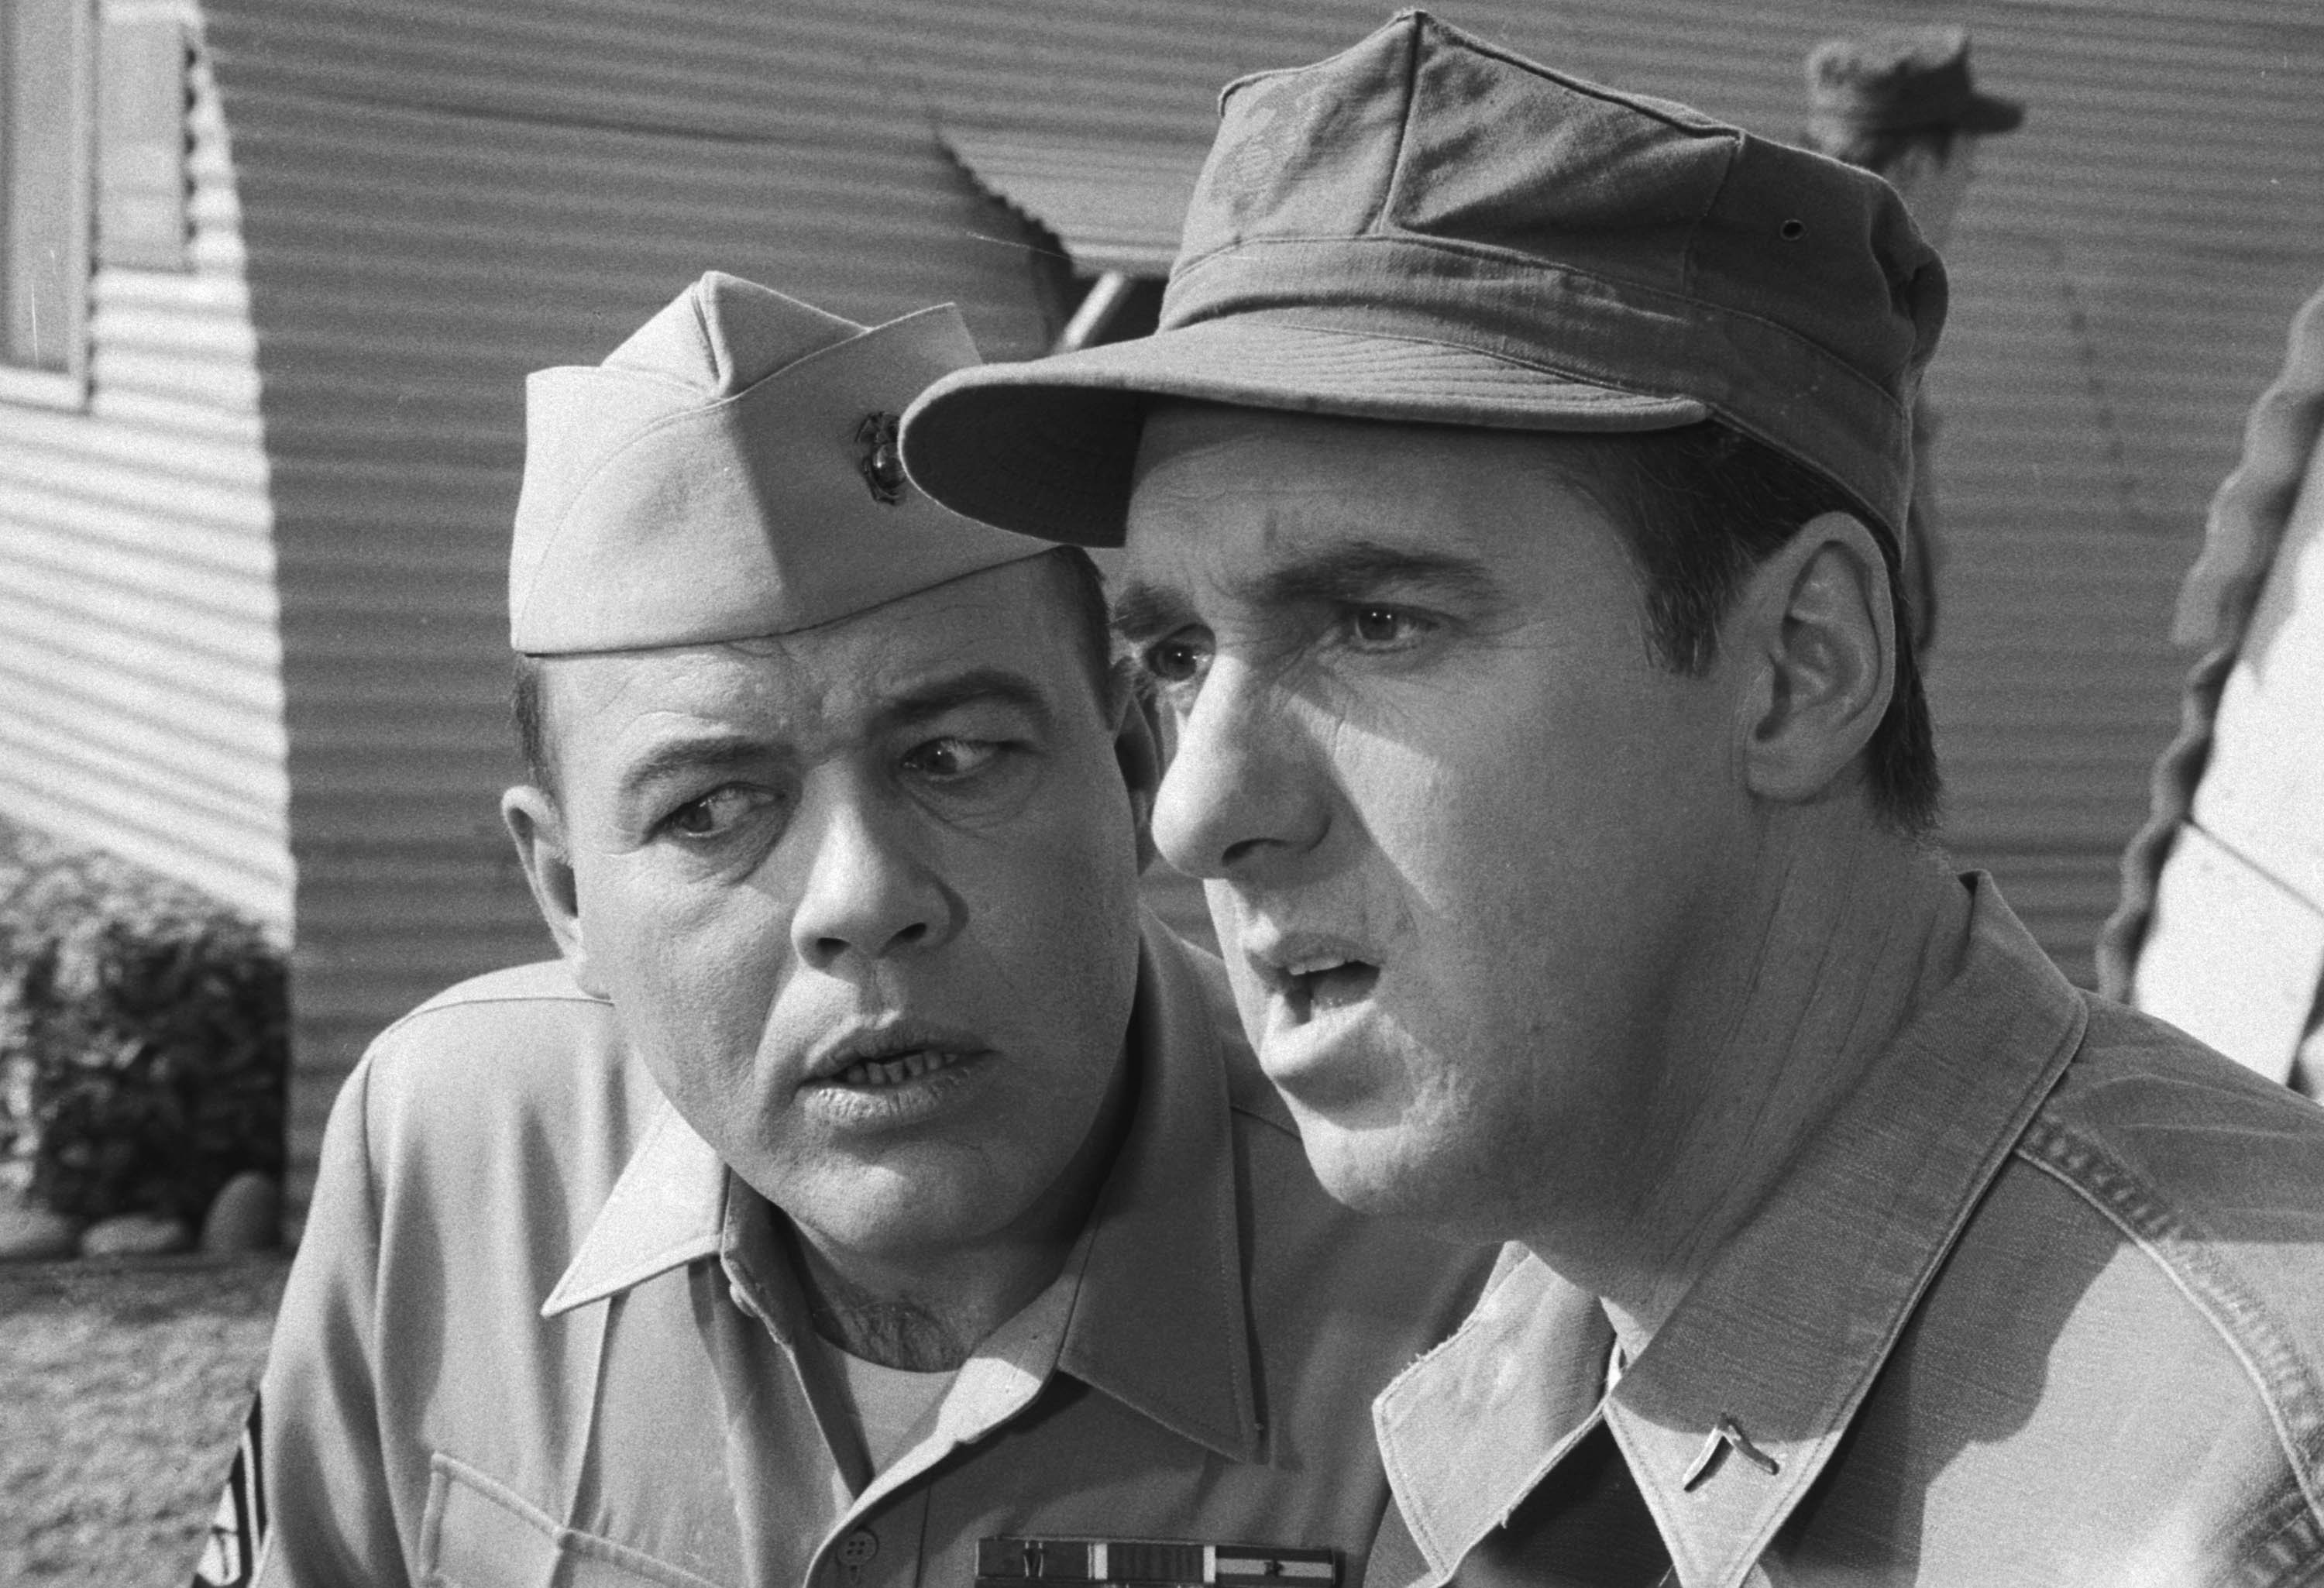 Jim Nabors, right, as Gomer Pyle with Frank Sutton as Sgt. Carter on 'Gomer Pyle. U.S.M.C.'